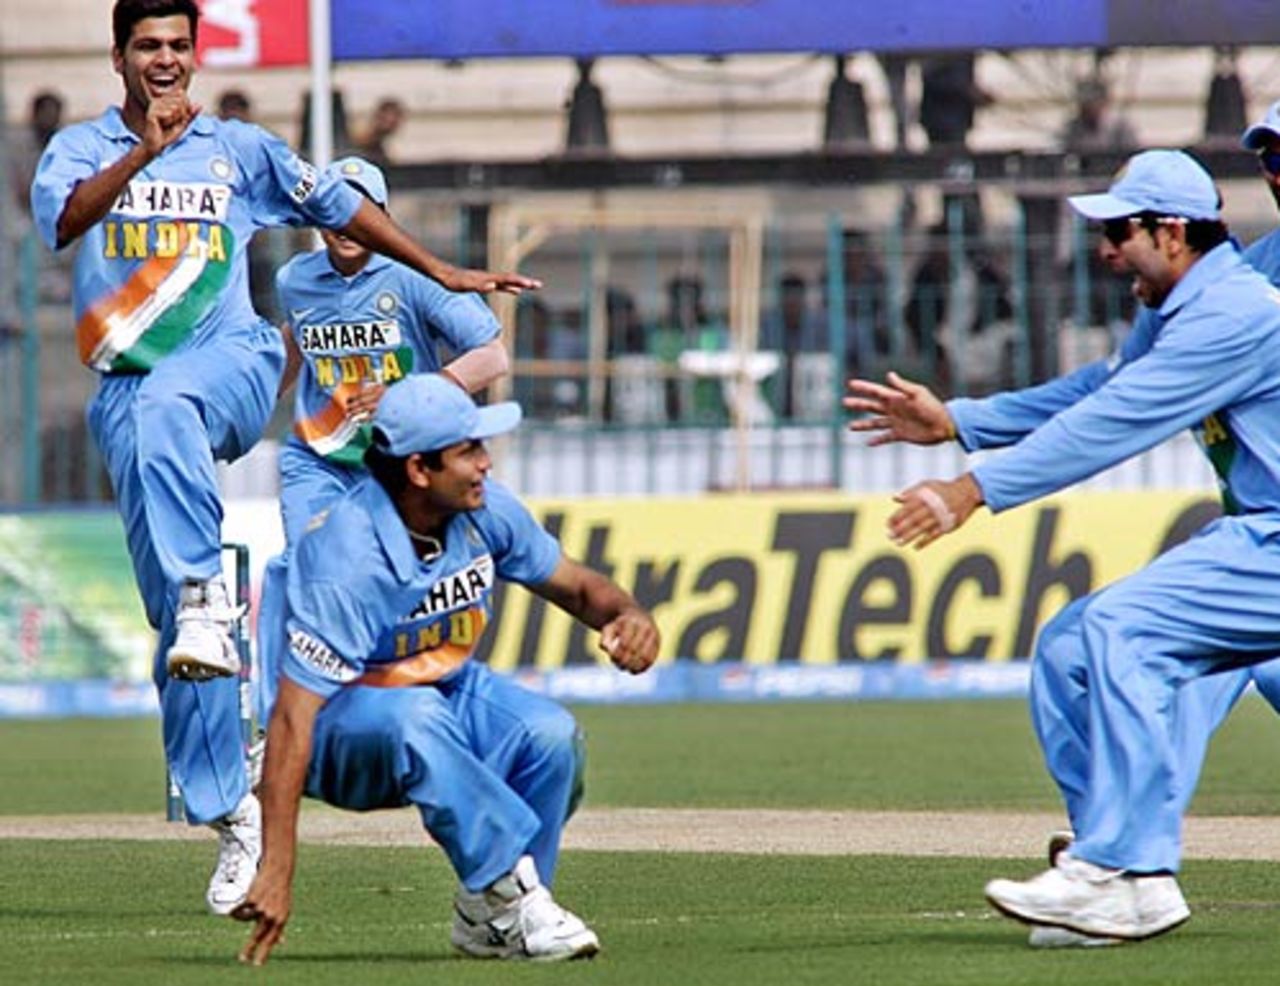 The Indian players rush towards Irfan Pathan after taking a diving catch at square leg, Pakistan v India, 4th ODI, Multan, February 16 2006